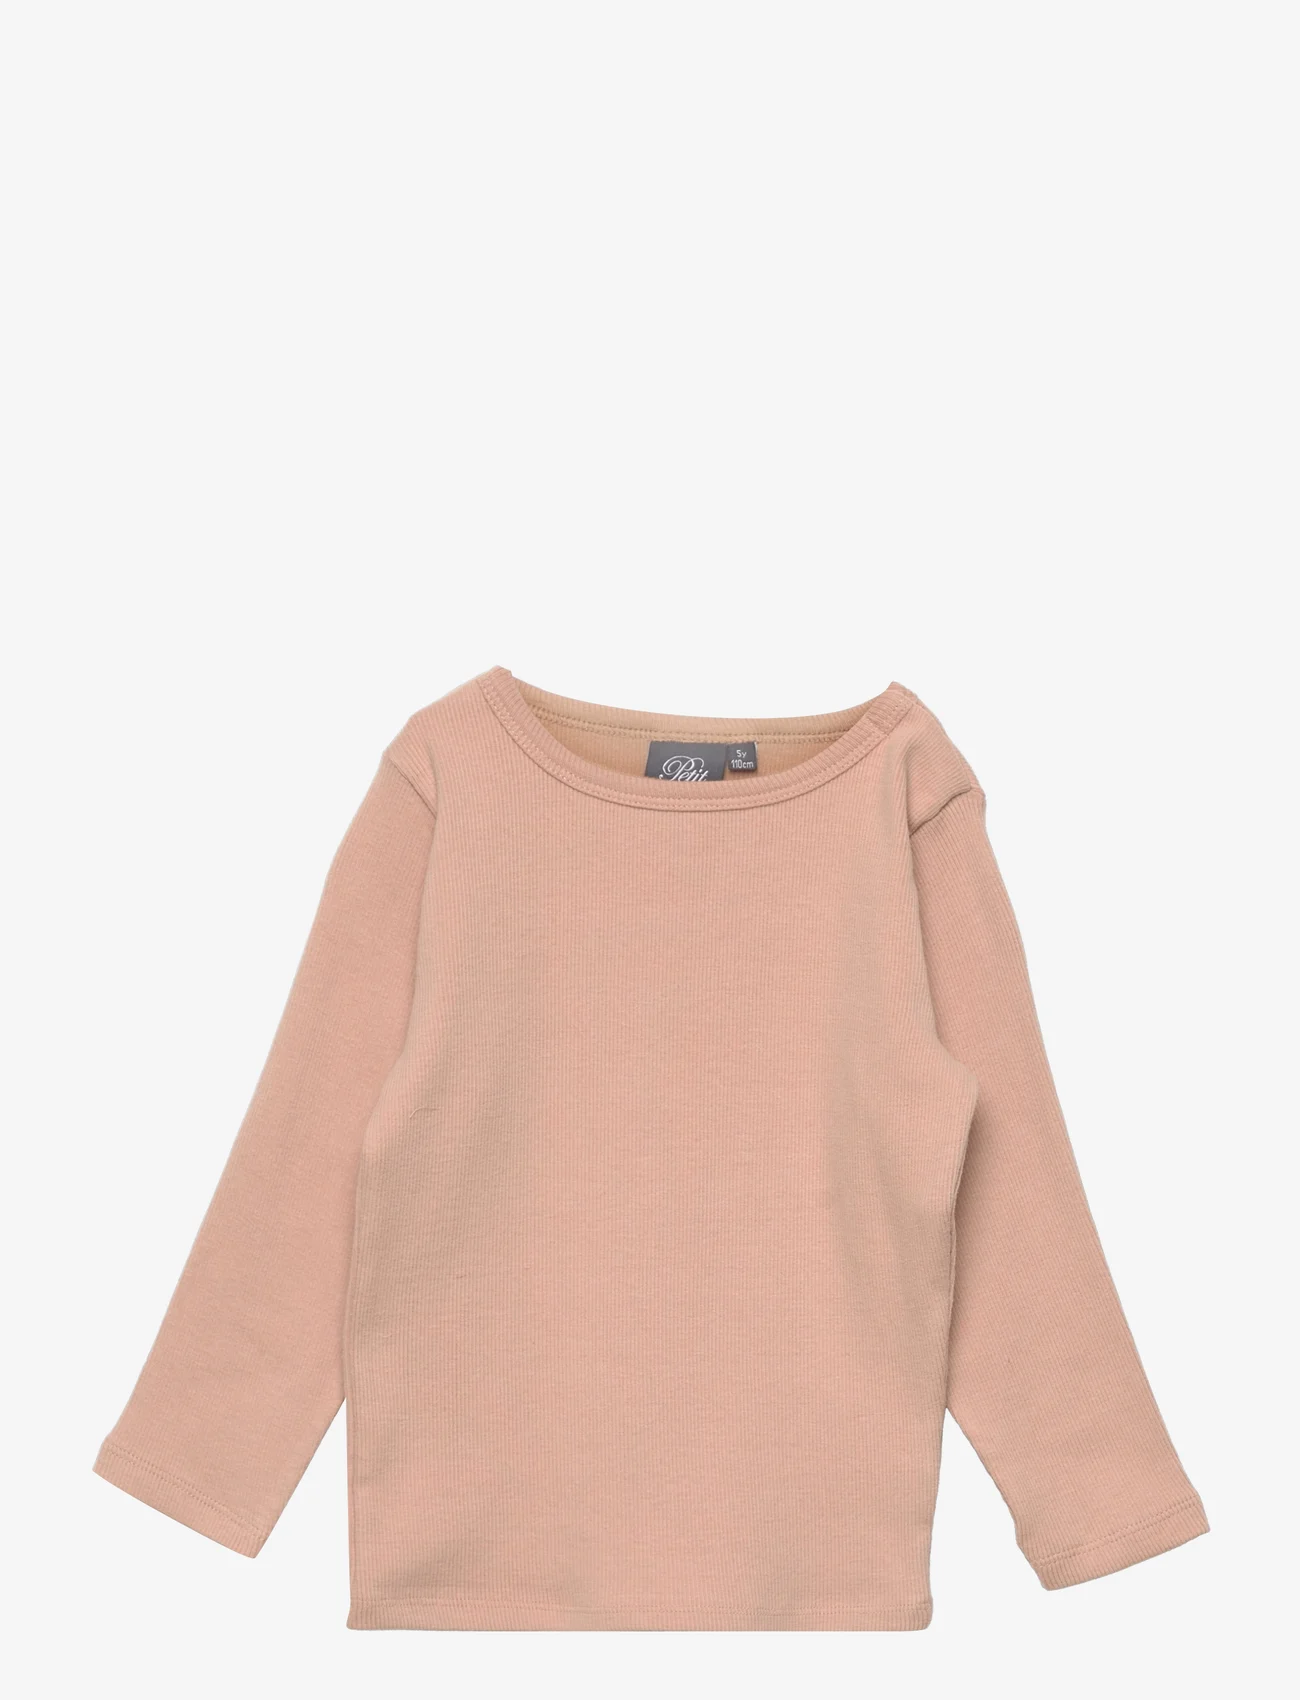 Sofie Schnoor Baby and Kids - T-shirt long-sleeve - långärmade t-shirts - nougat - 0